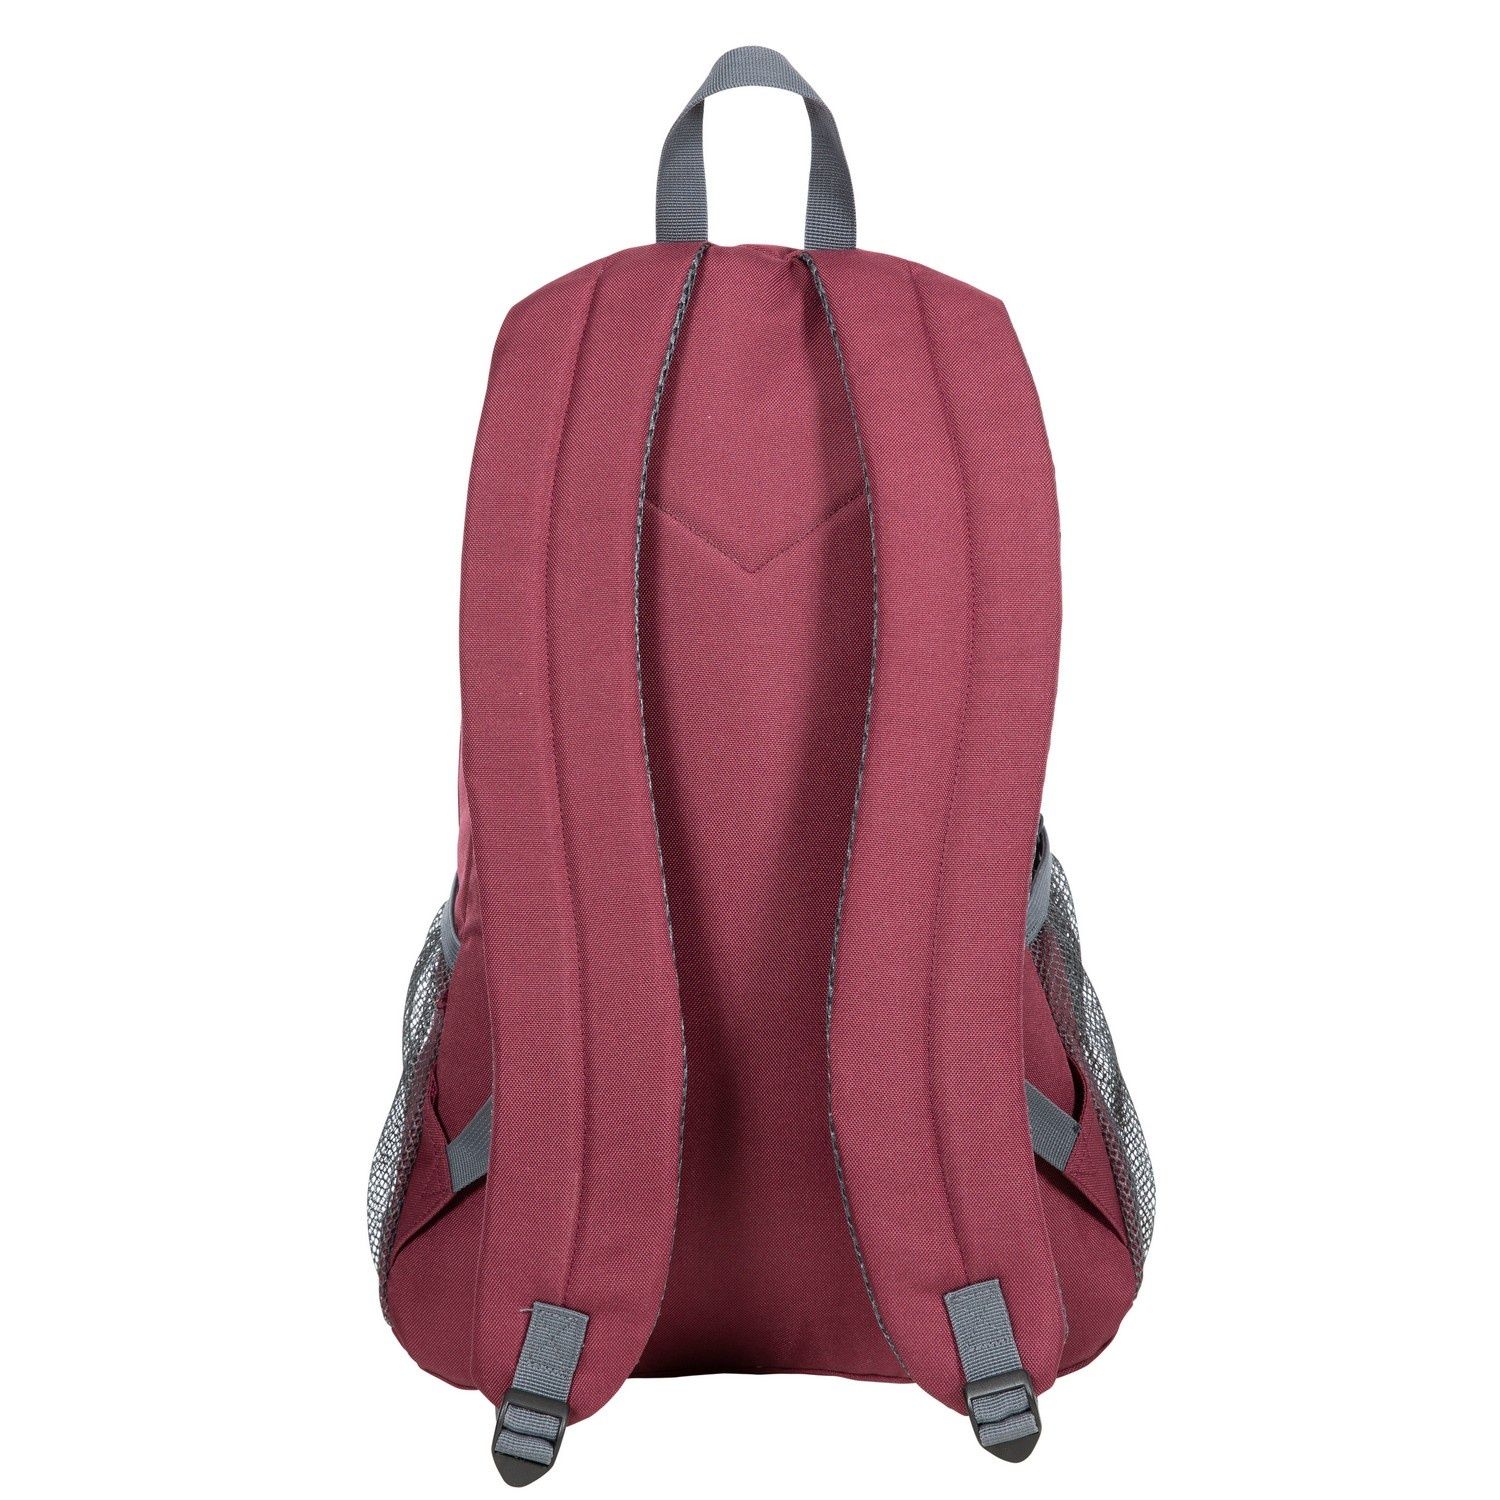 Material: 100% 600D polyester. 25L capacity. 3 zipped sections. Internal laptop pocket. 2 mesh side pockets.